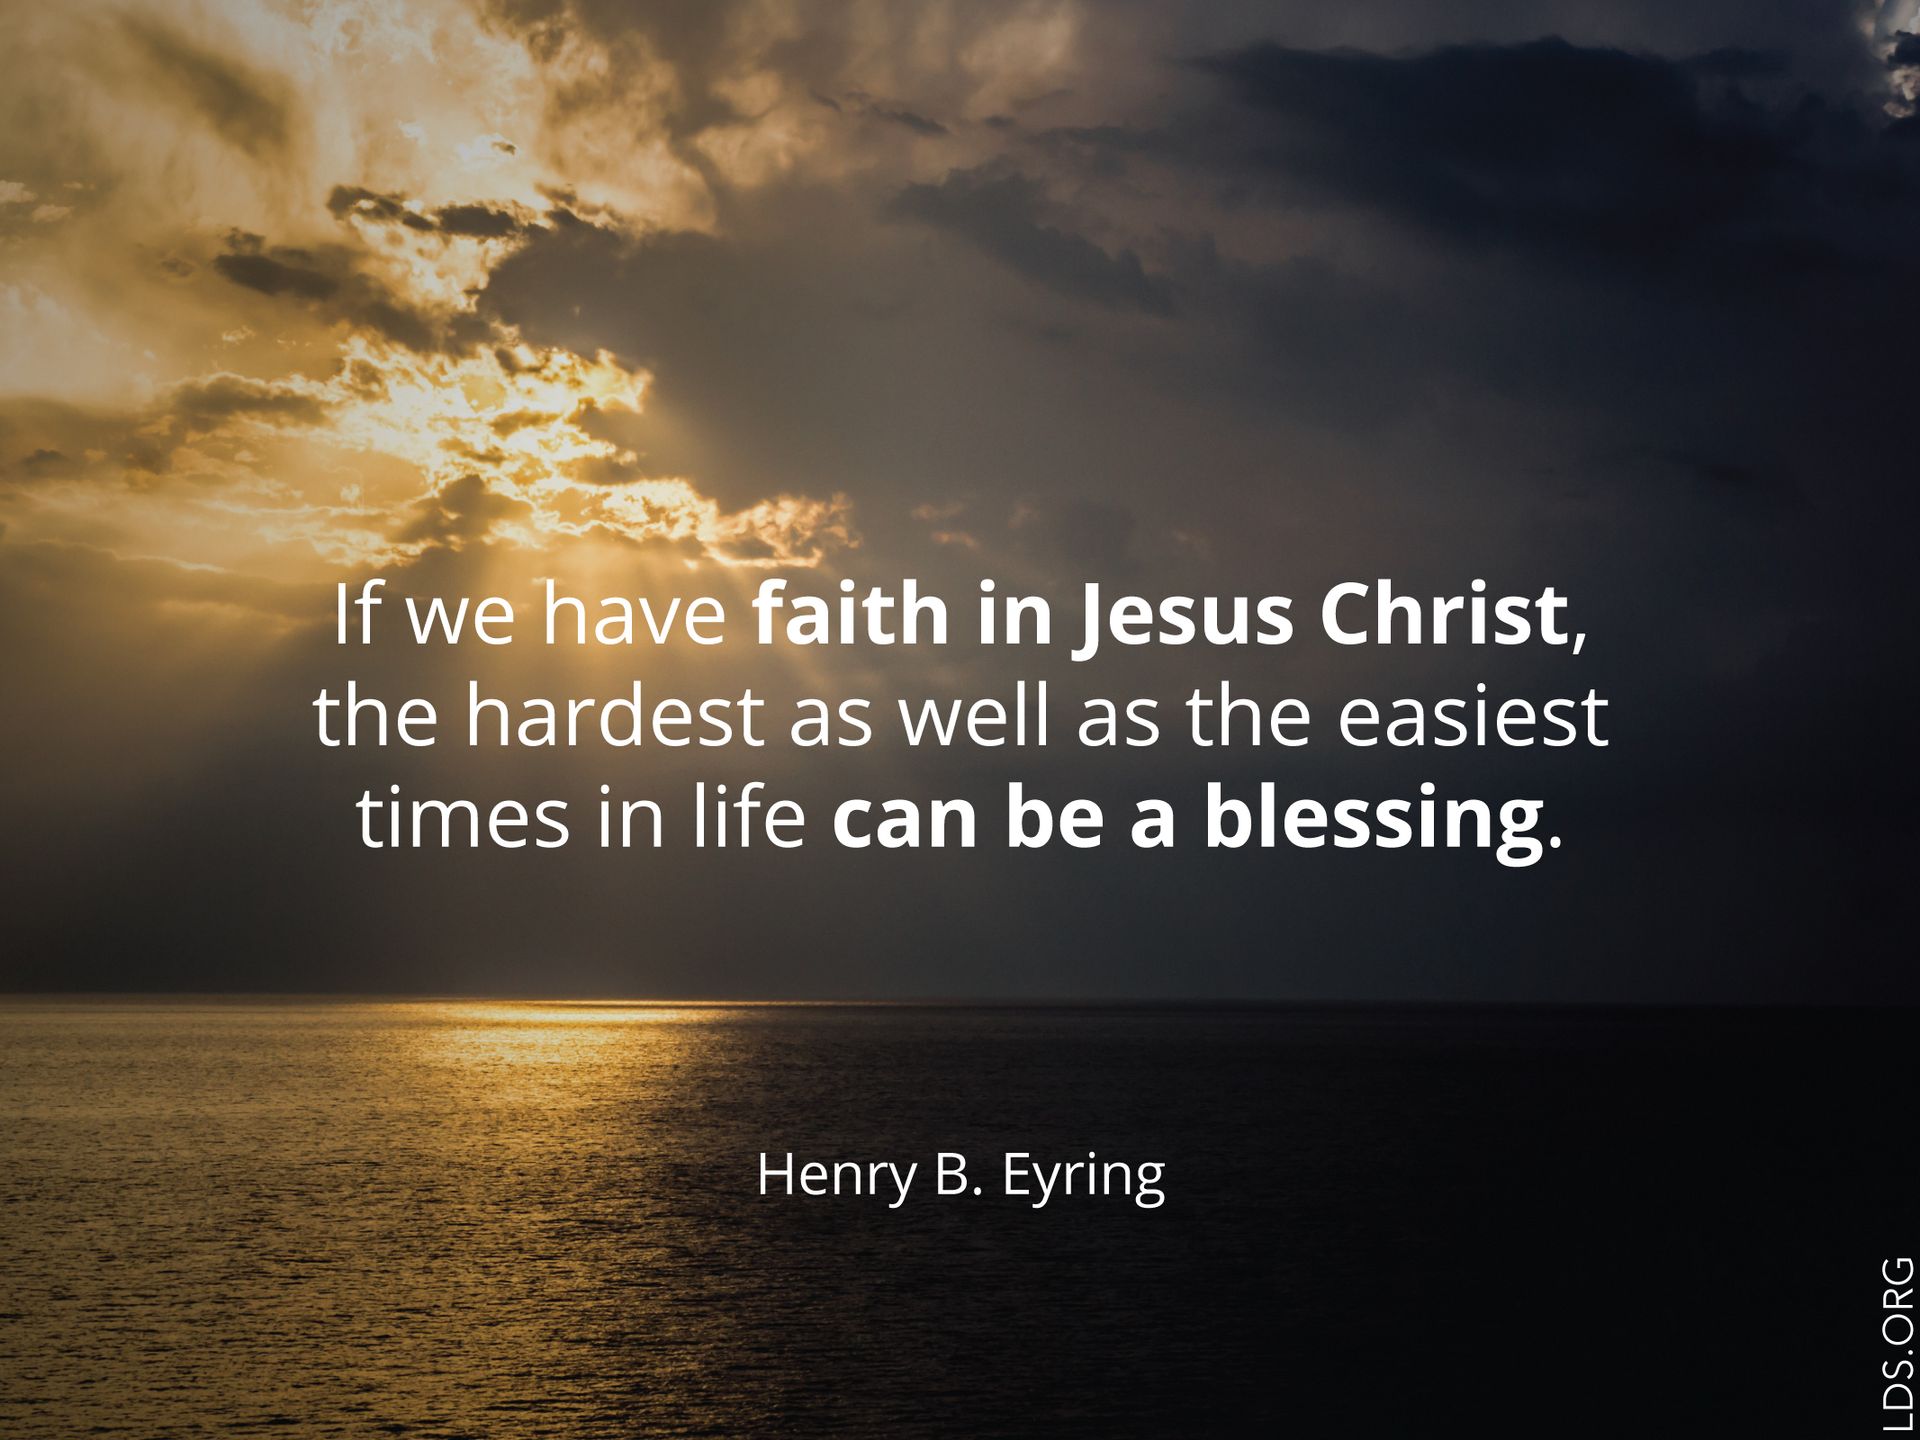 “If we have faith in Jesus Christ, the hardest as well as the easiest times in life can be a blessing.”—President Henry B. Eyring, “Mountains to Climb”